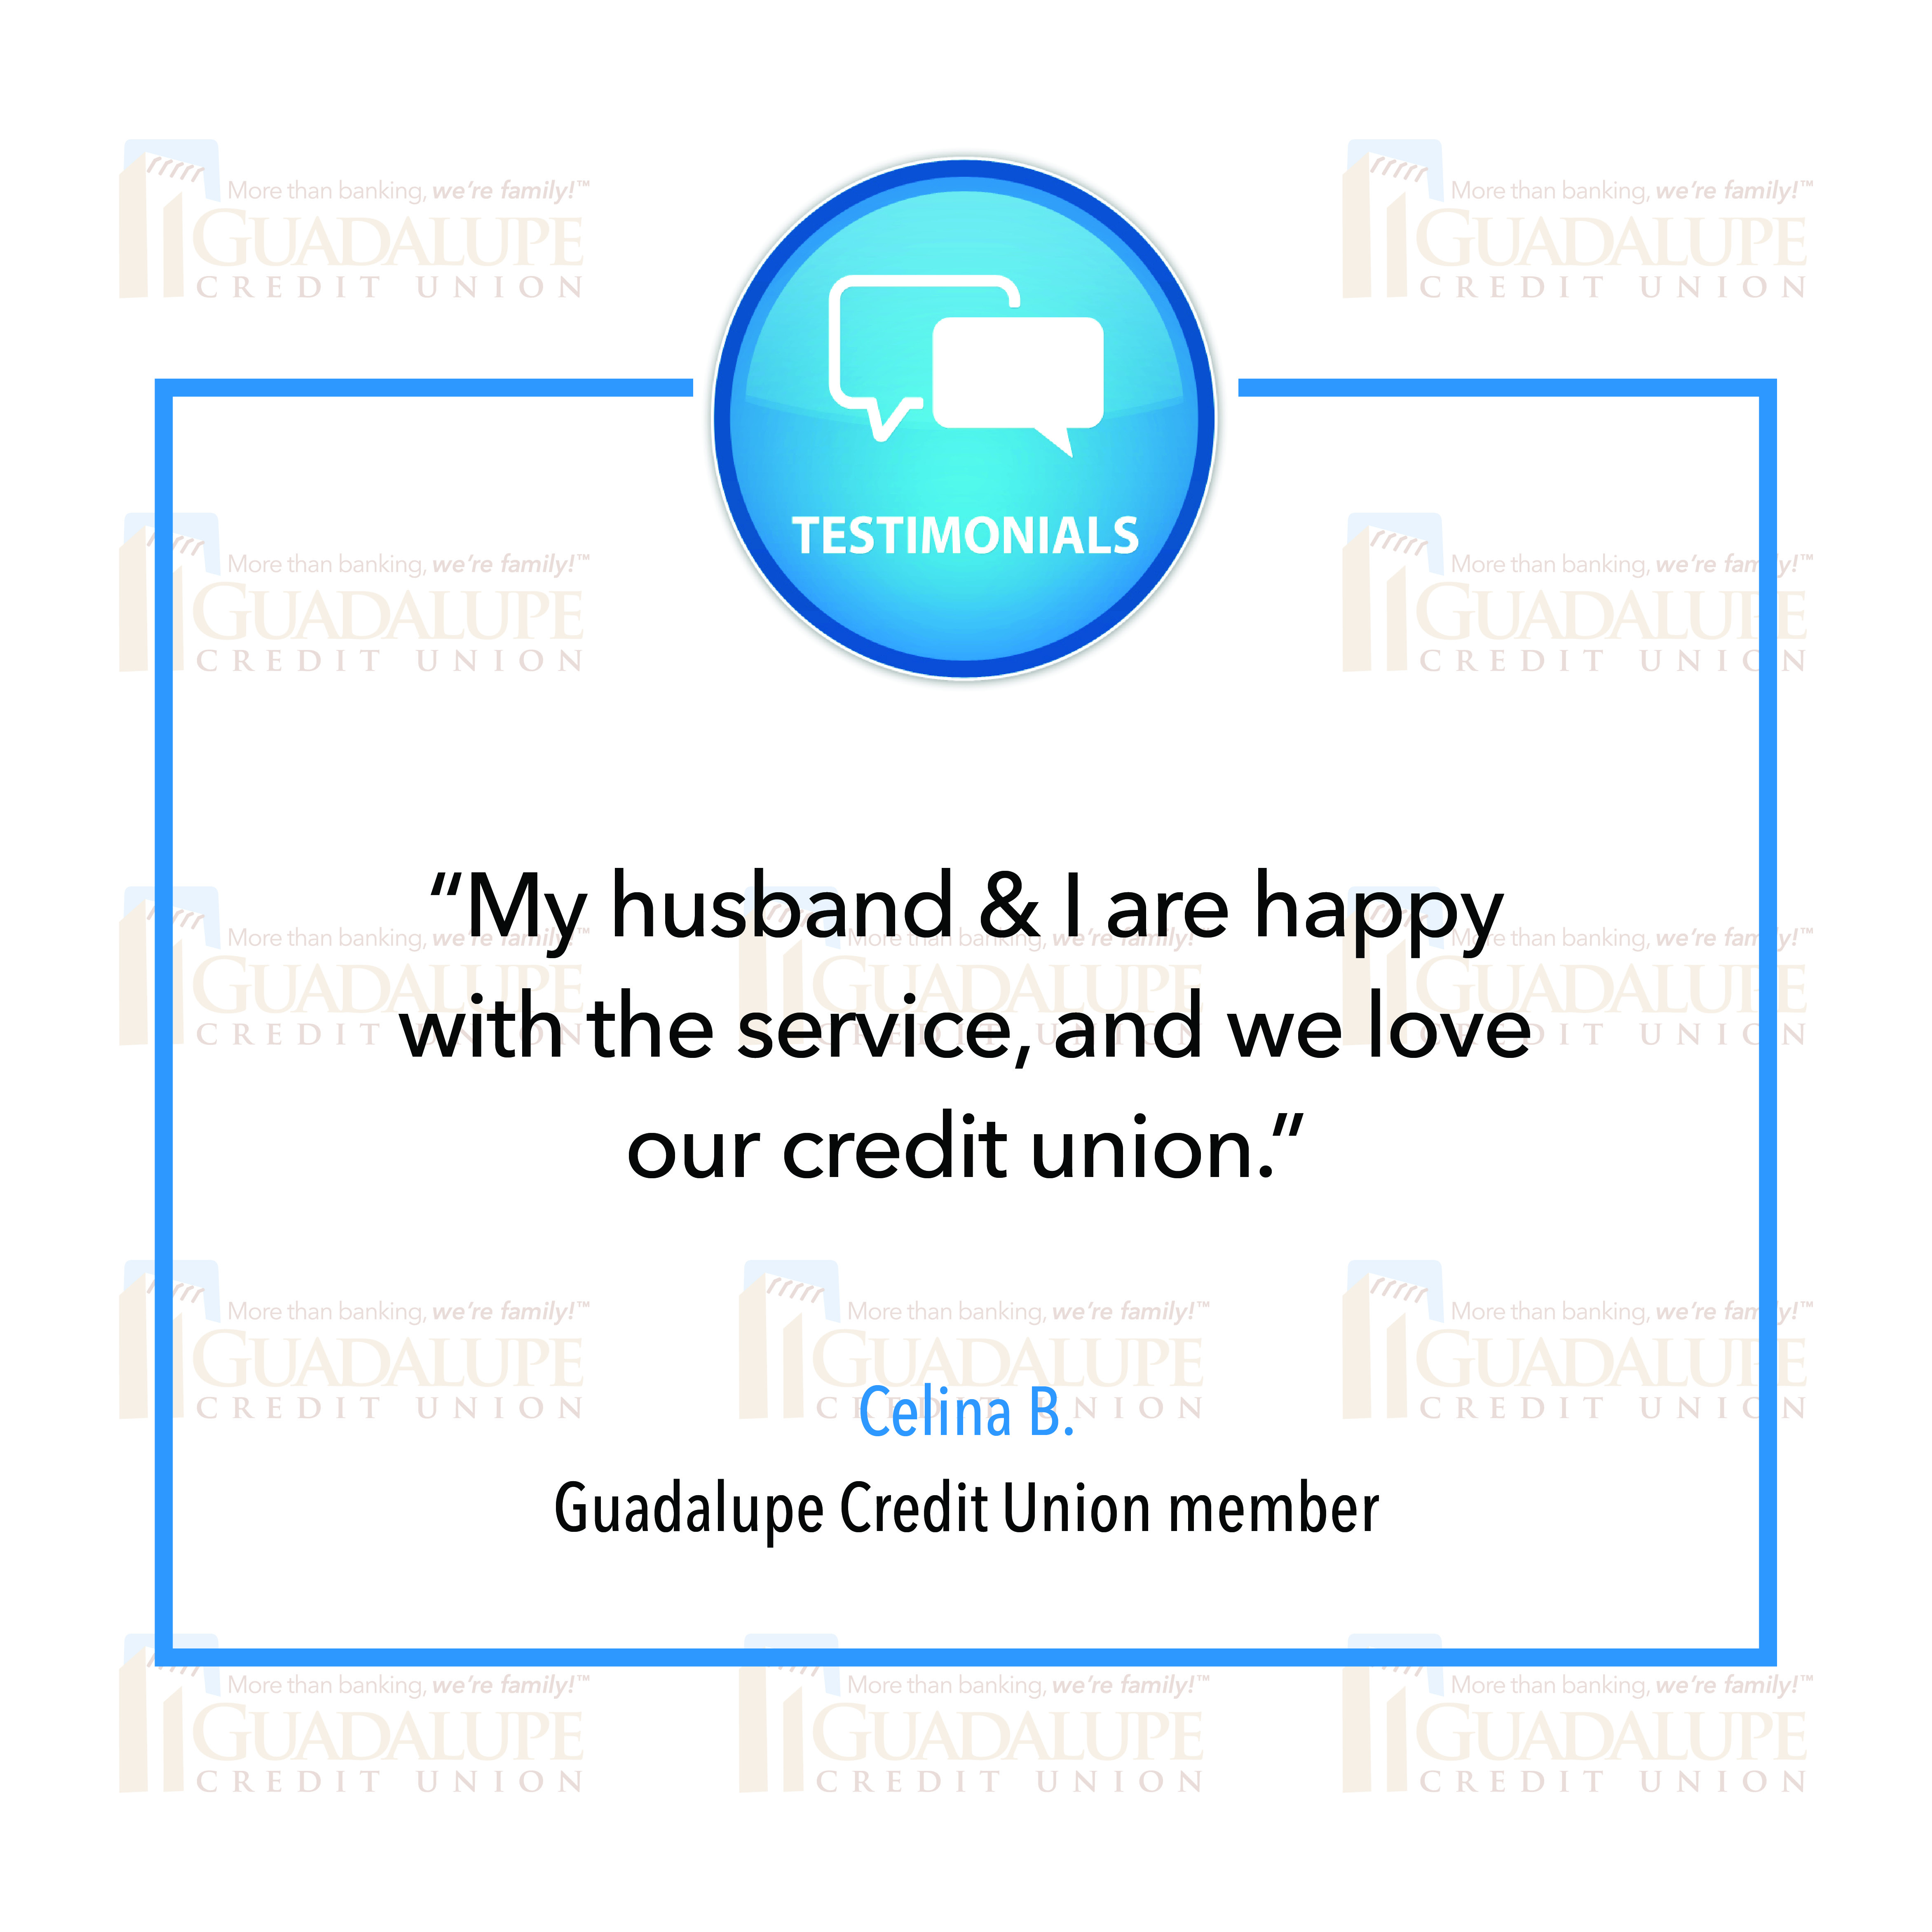 GCU Testimonial - "Have been a member of Guadalupe Credit Union for many years and have always been happy with the service."